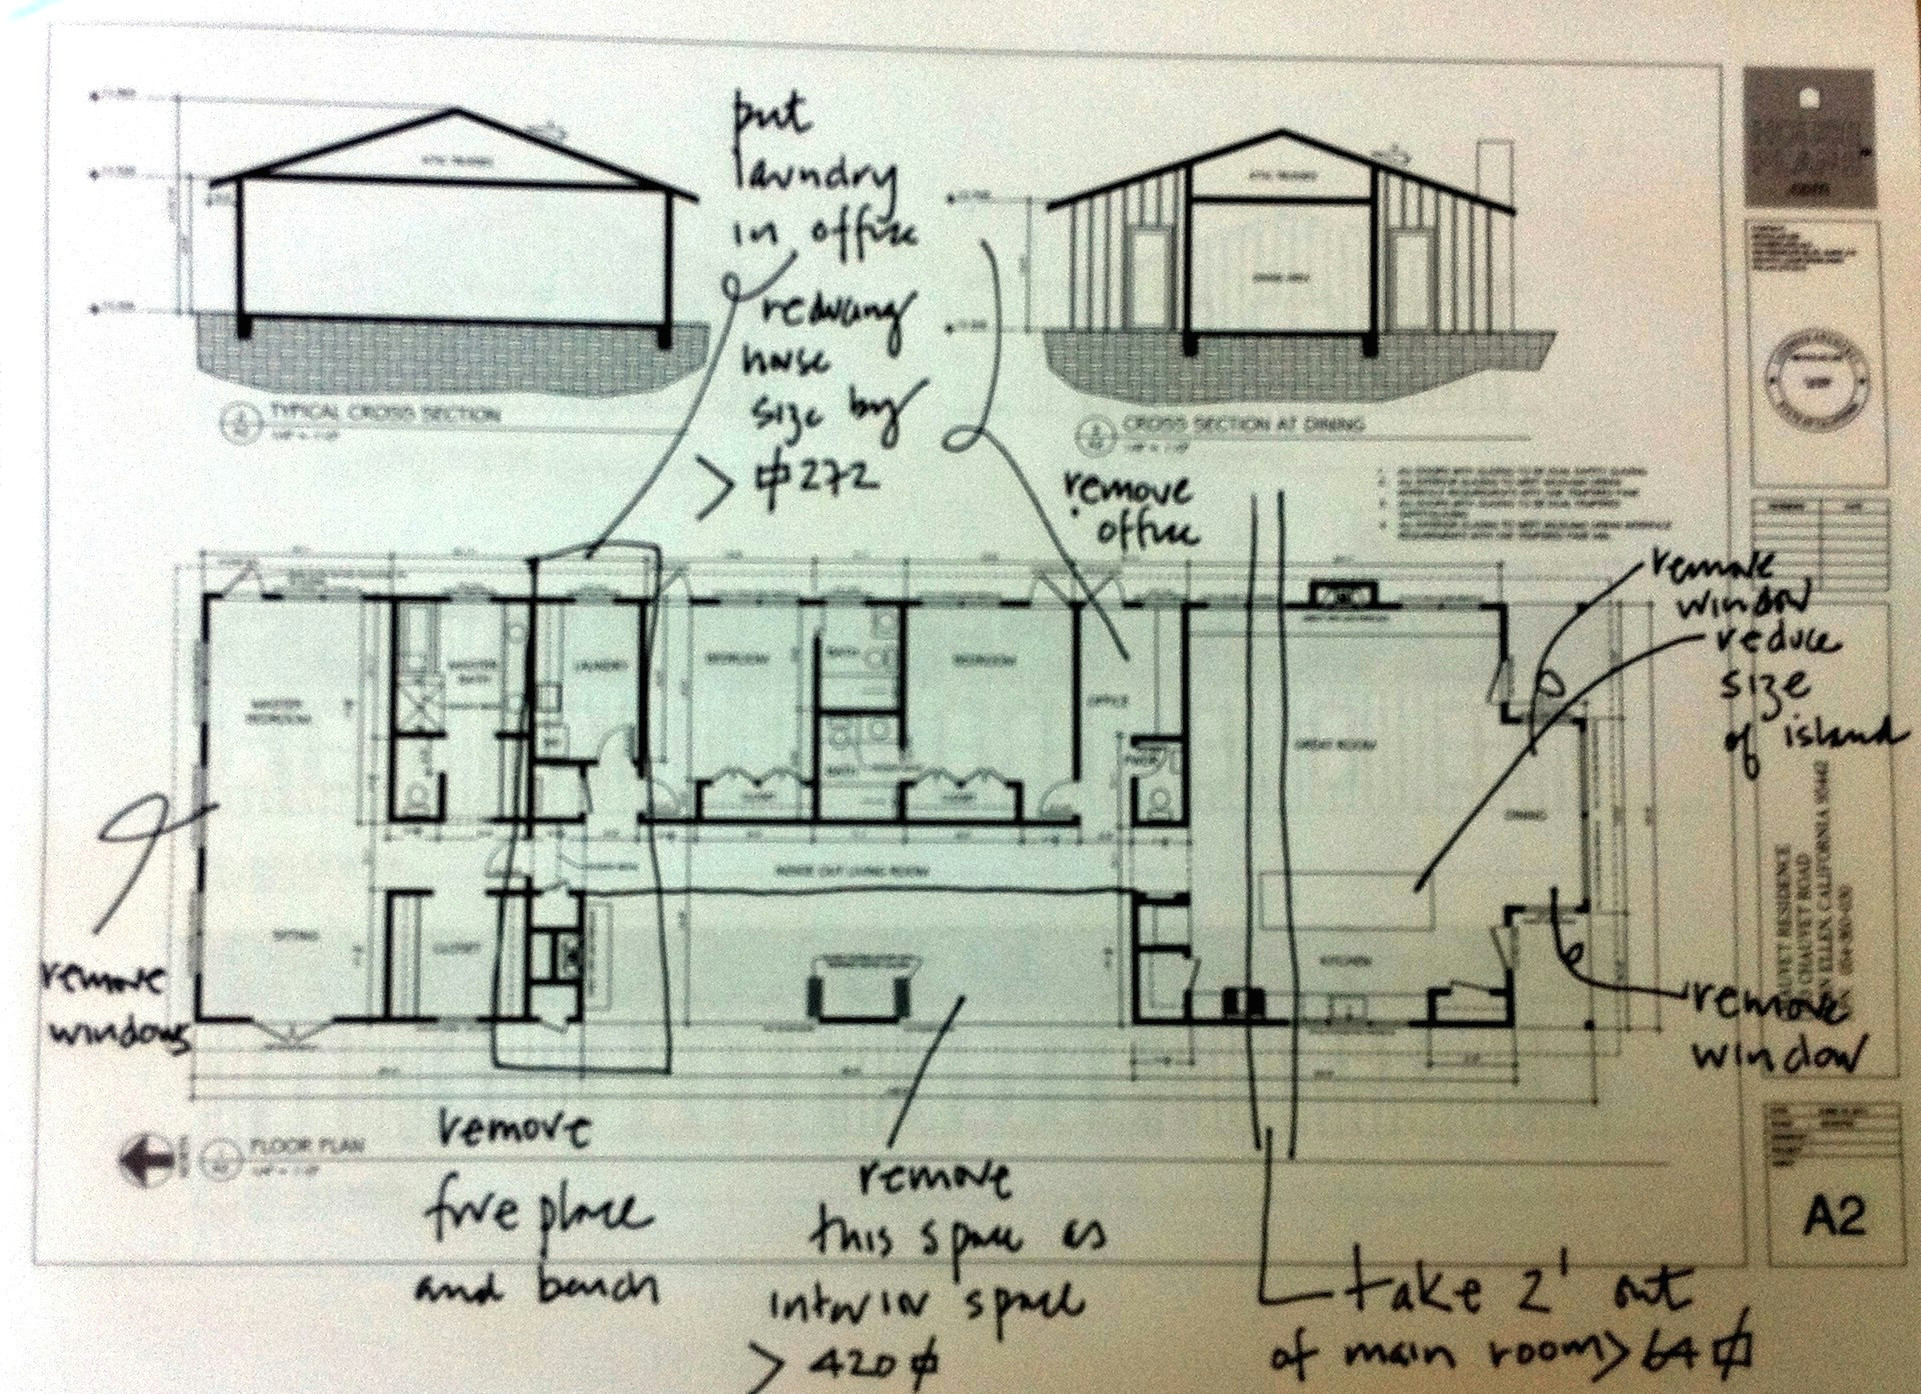 L Drawing Image Draw House Plans Online Awesome Line Floor Plan Awesome Line Floor